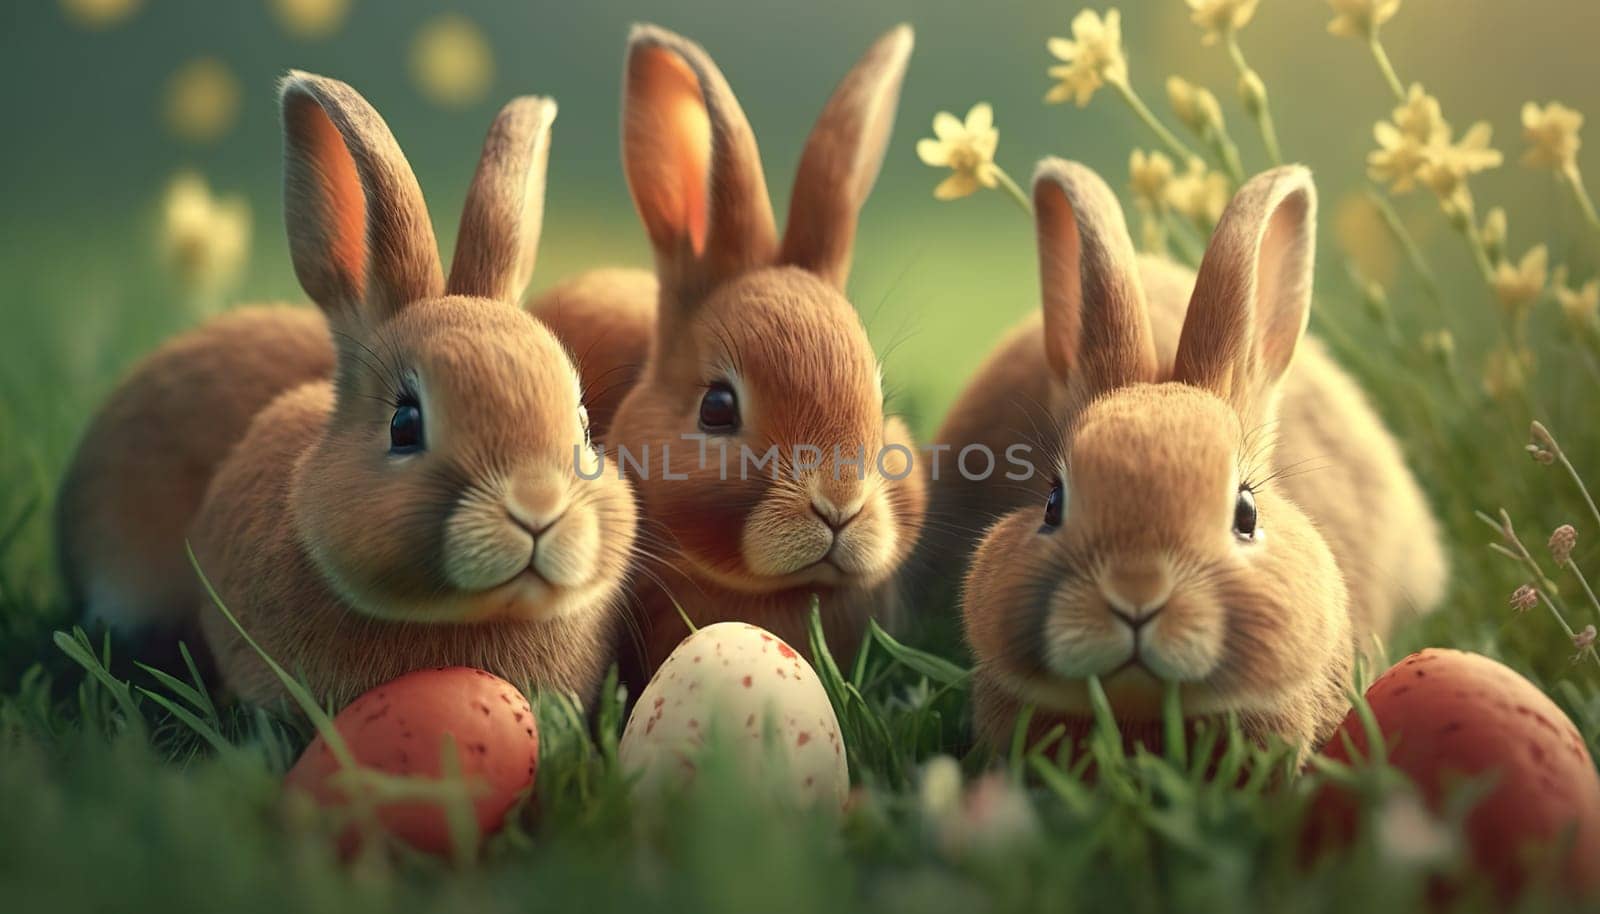 Three adorable bunnies nestled among Easter eggs and spring flowers